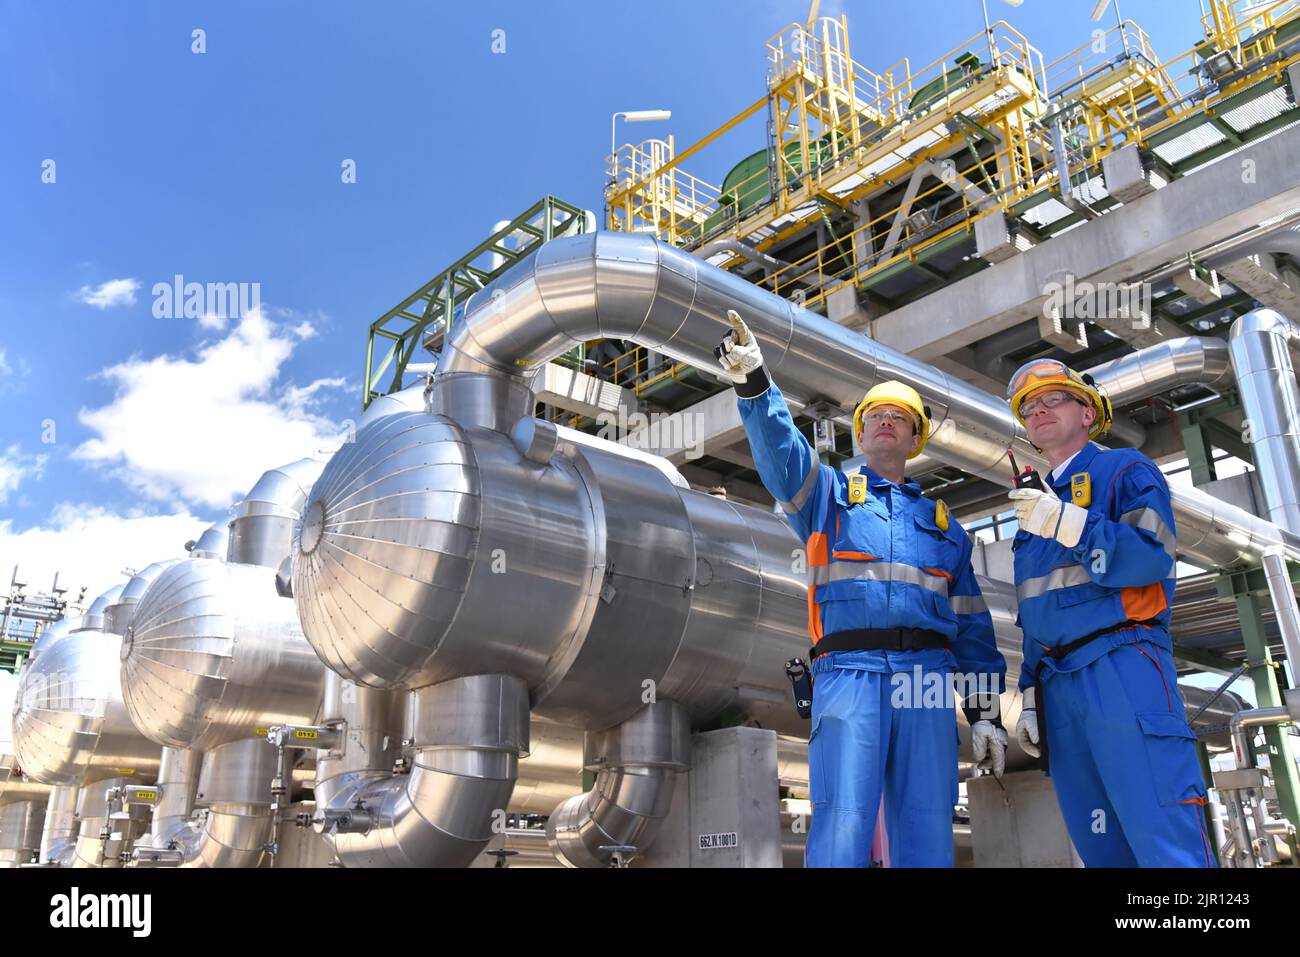 teamwork: group of industrial workers in a refinery - oil processing equipment and machinery Stock Photo